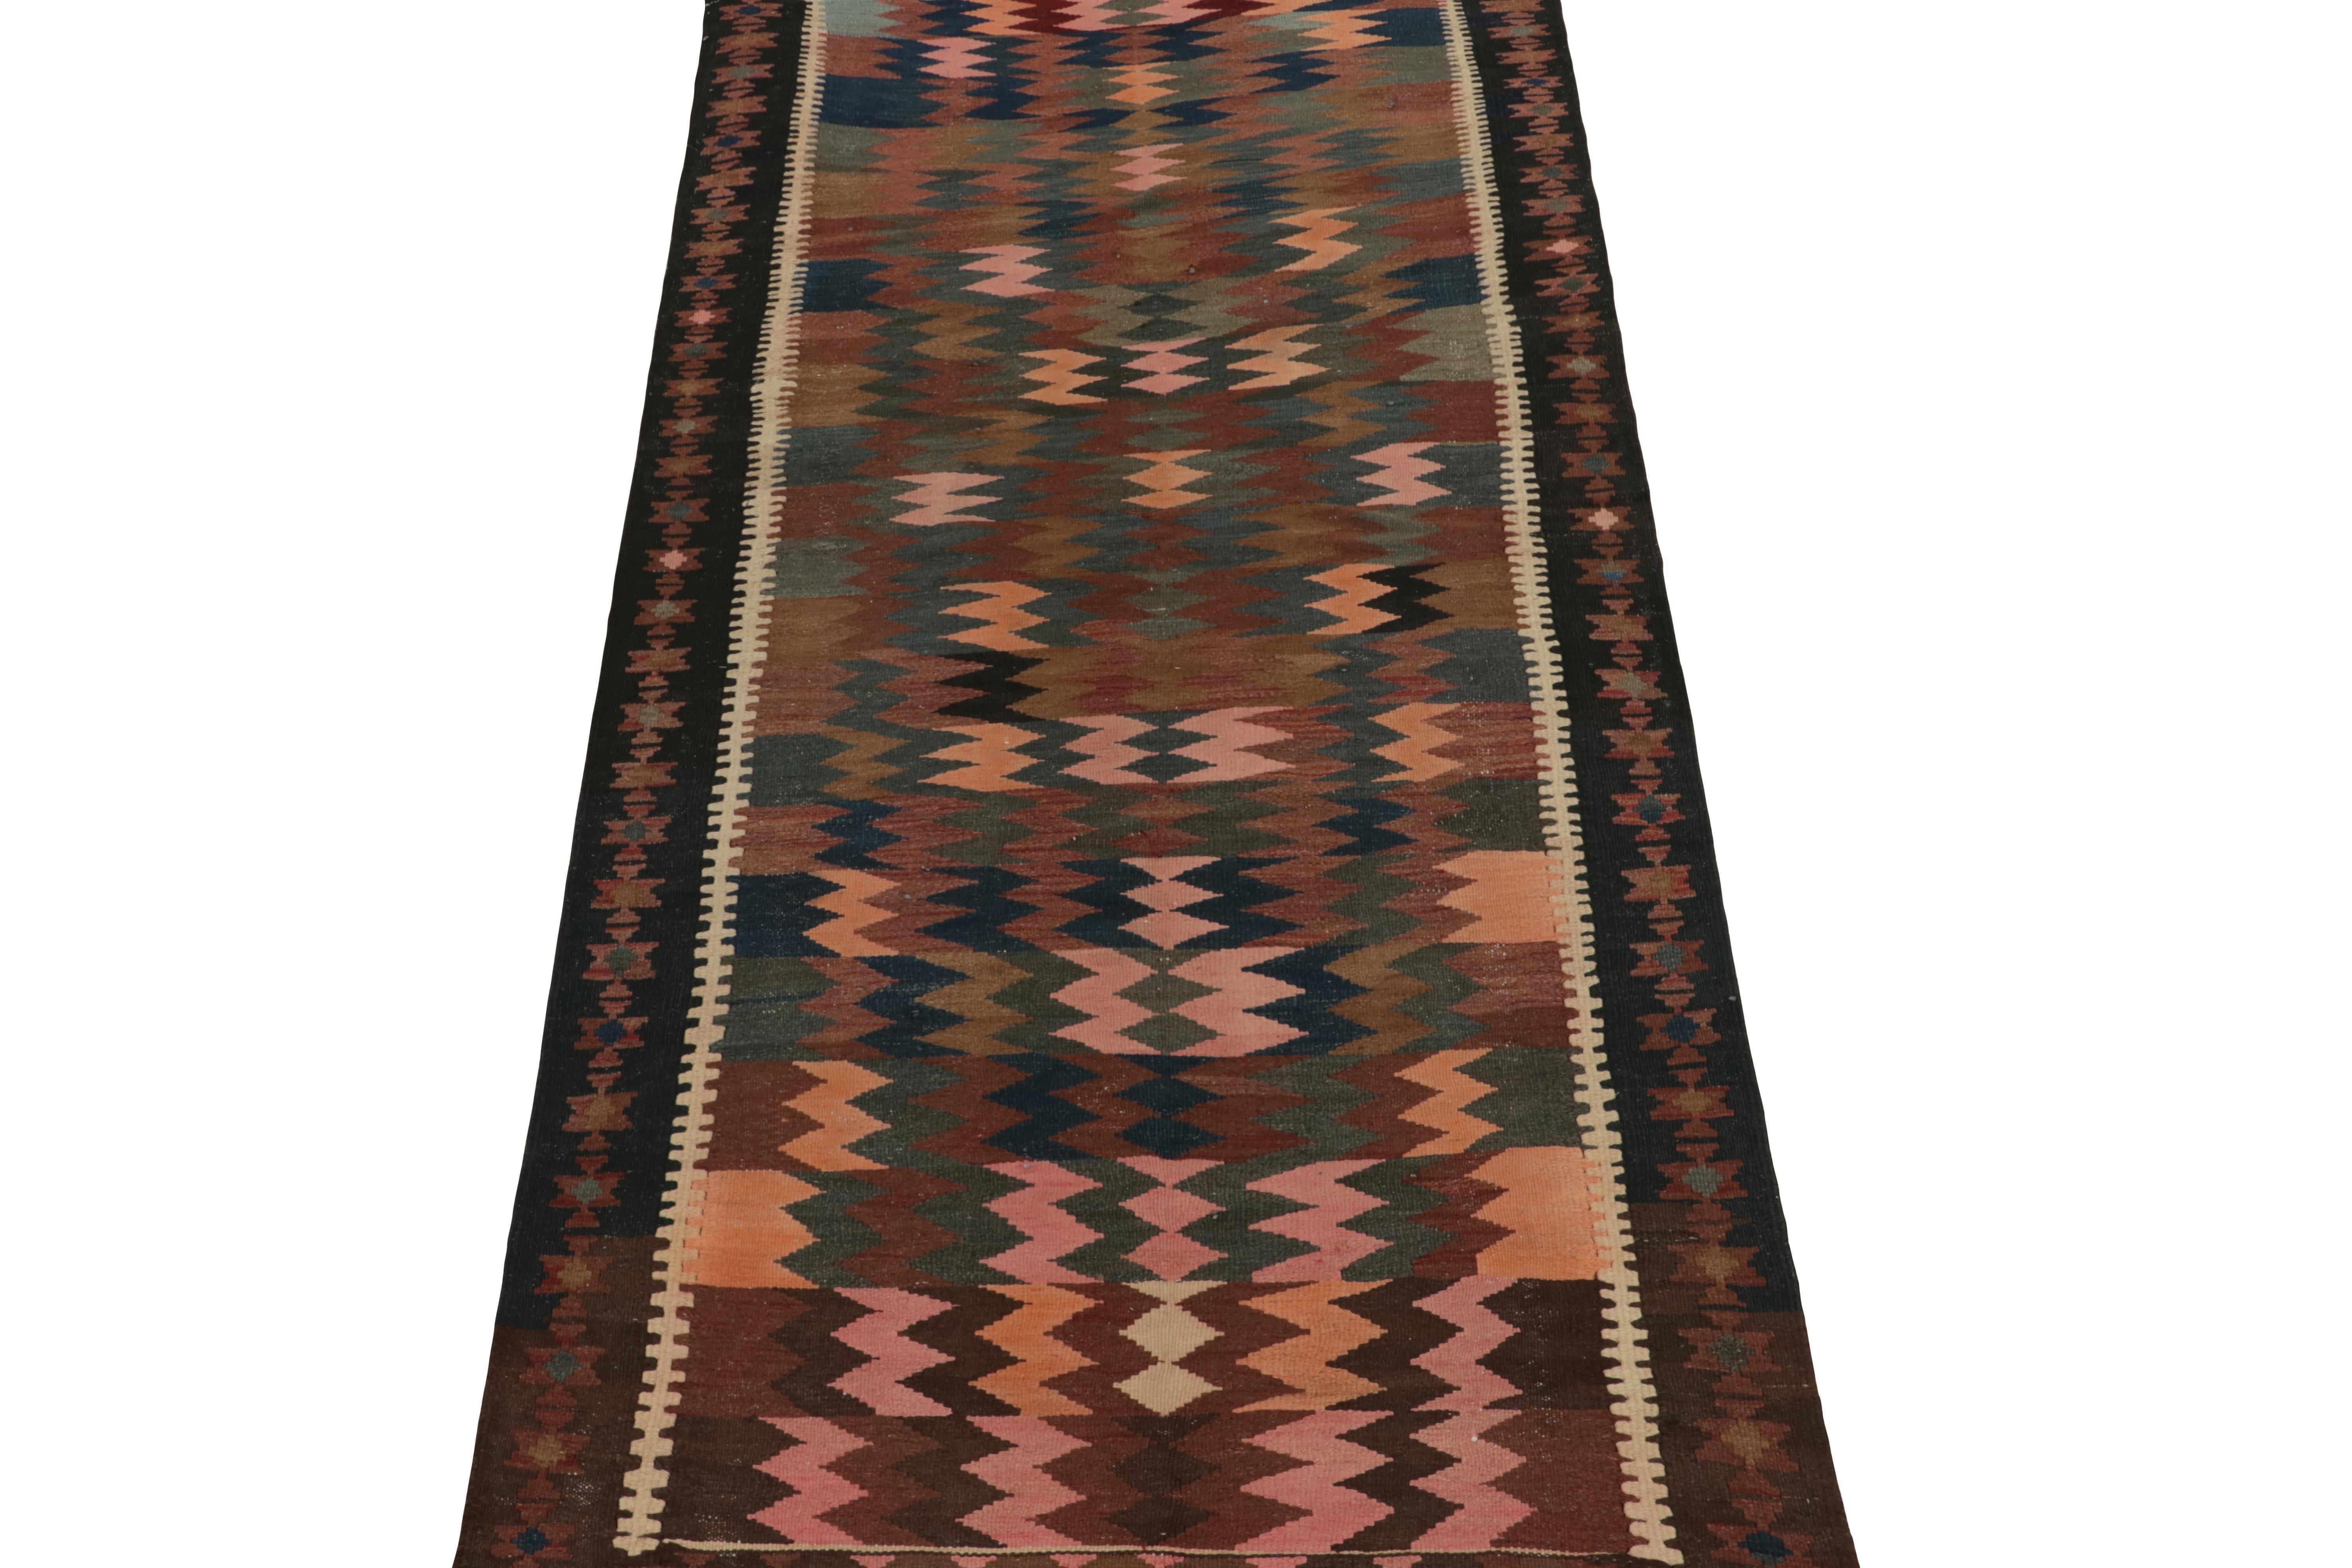 Hand-Knotted Vintage Persian Kilim Rug in Beige-Brown Tribal Geometric Pattern by Rug & Kilim For Sale